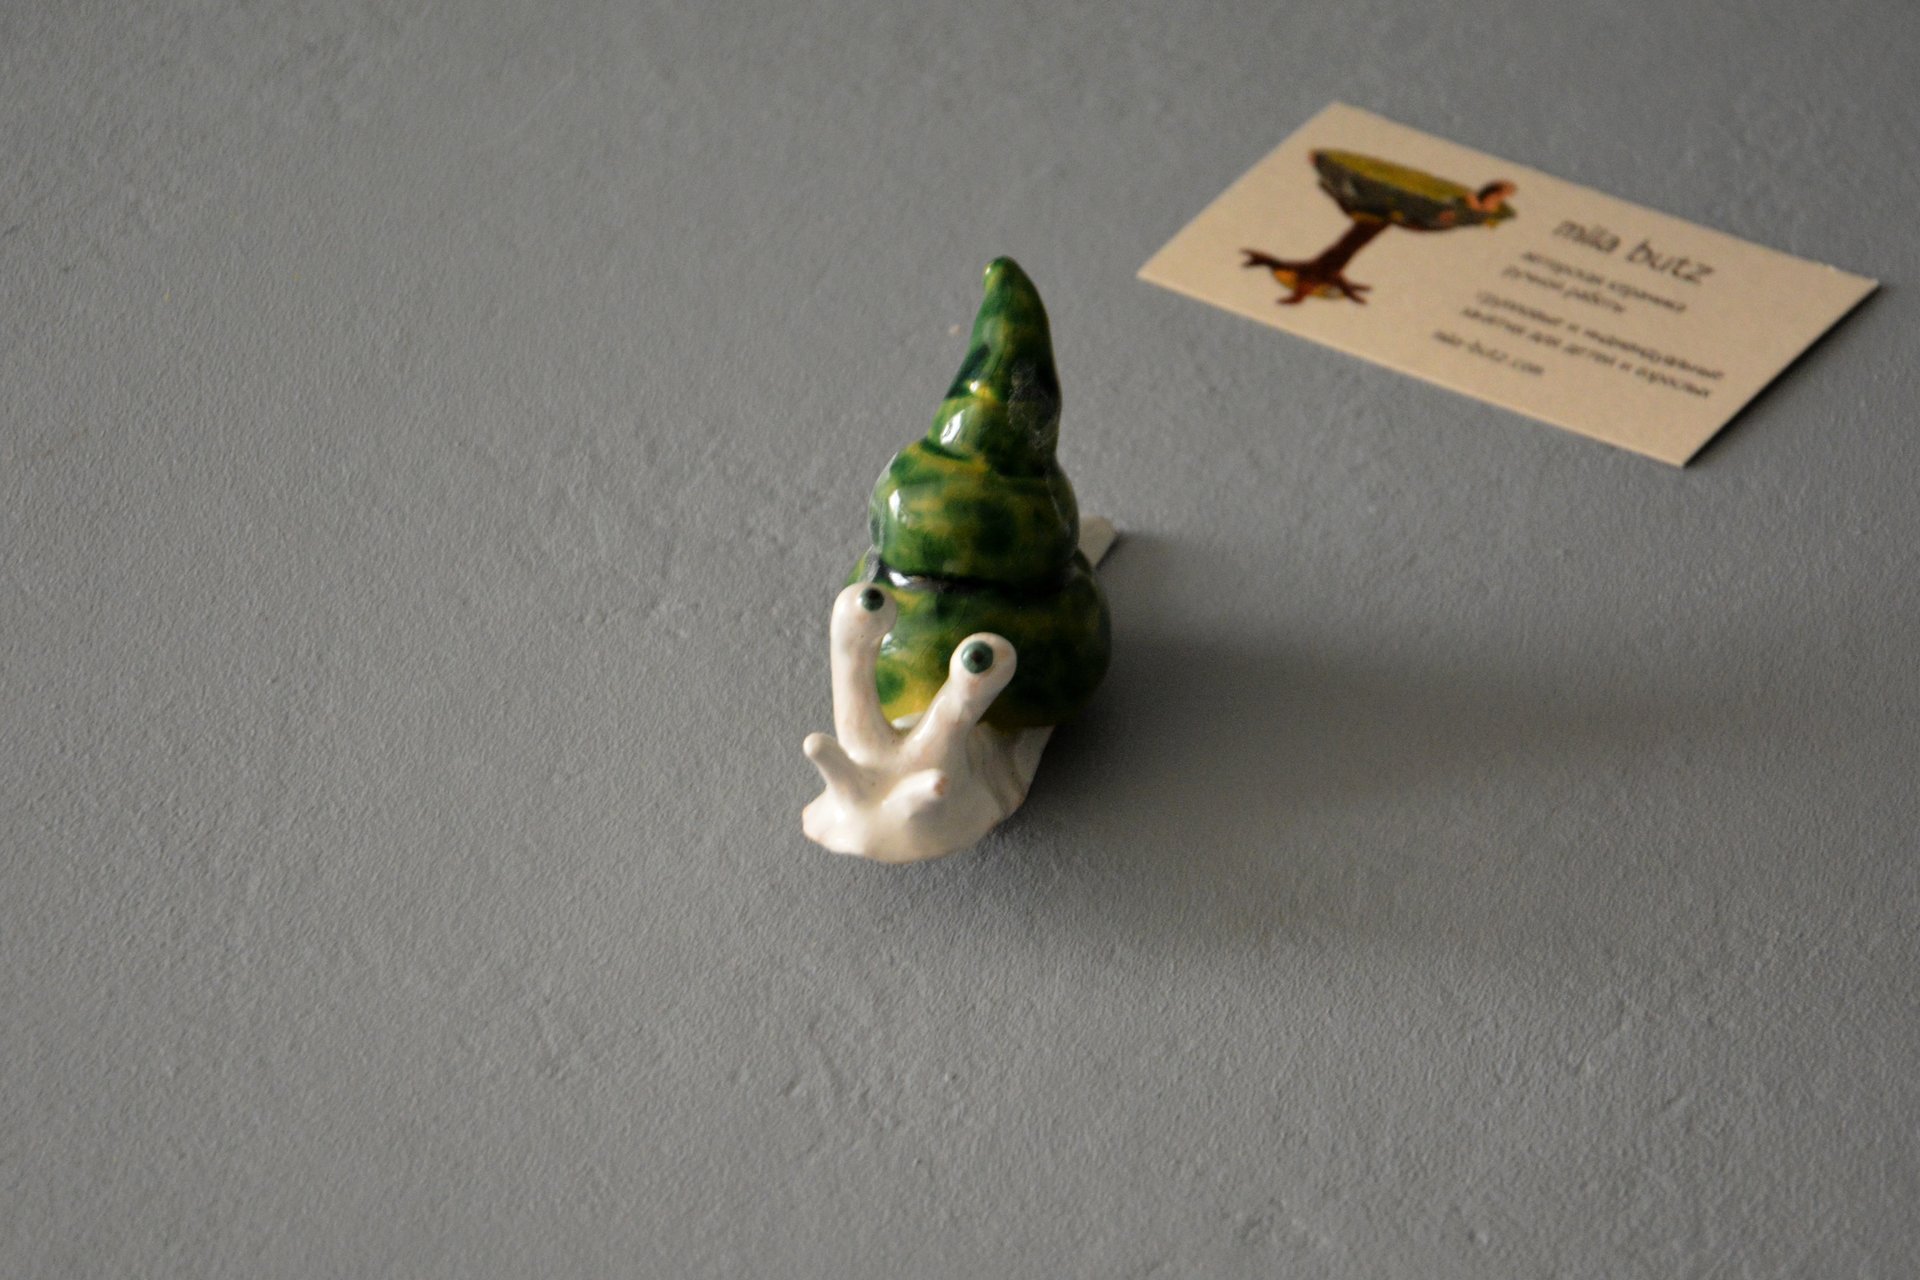 Figurine of a garden Cochlea, height - 3 cm, photo 1 of 6.